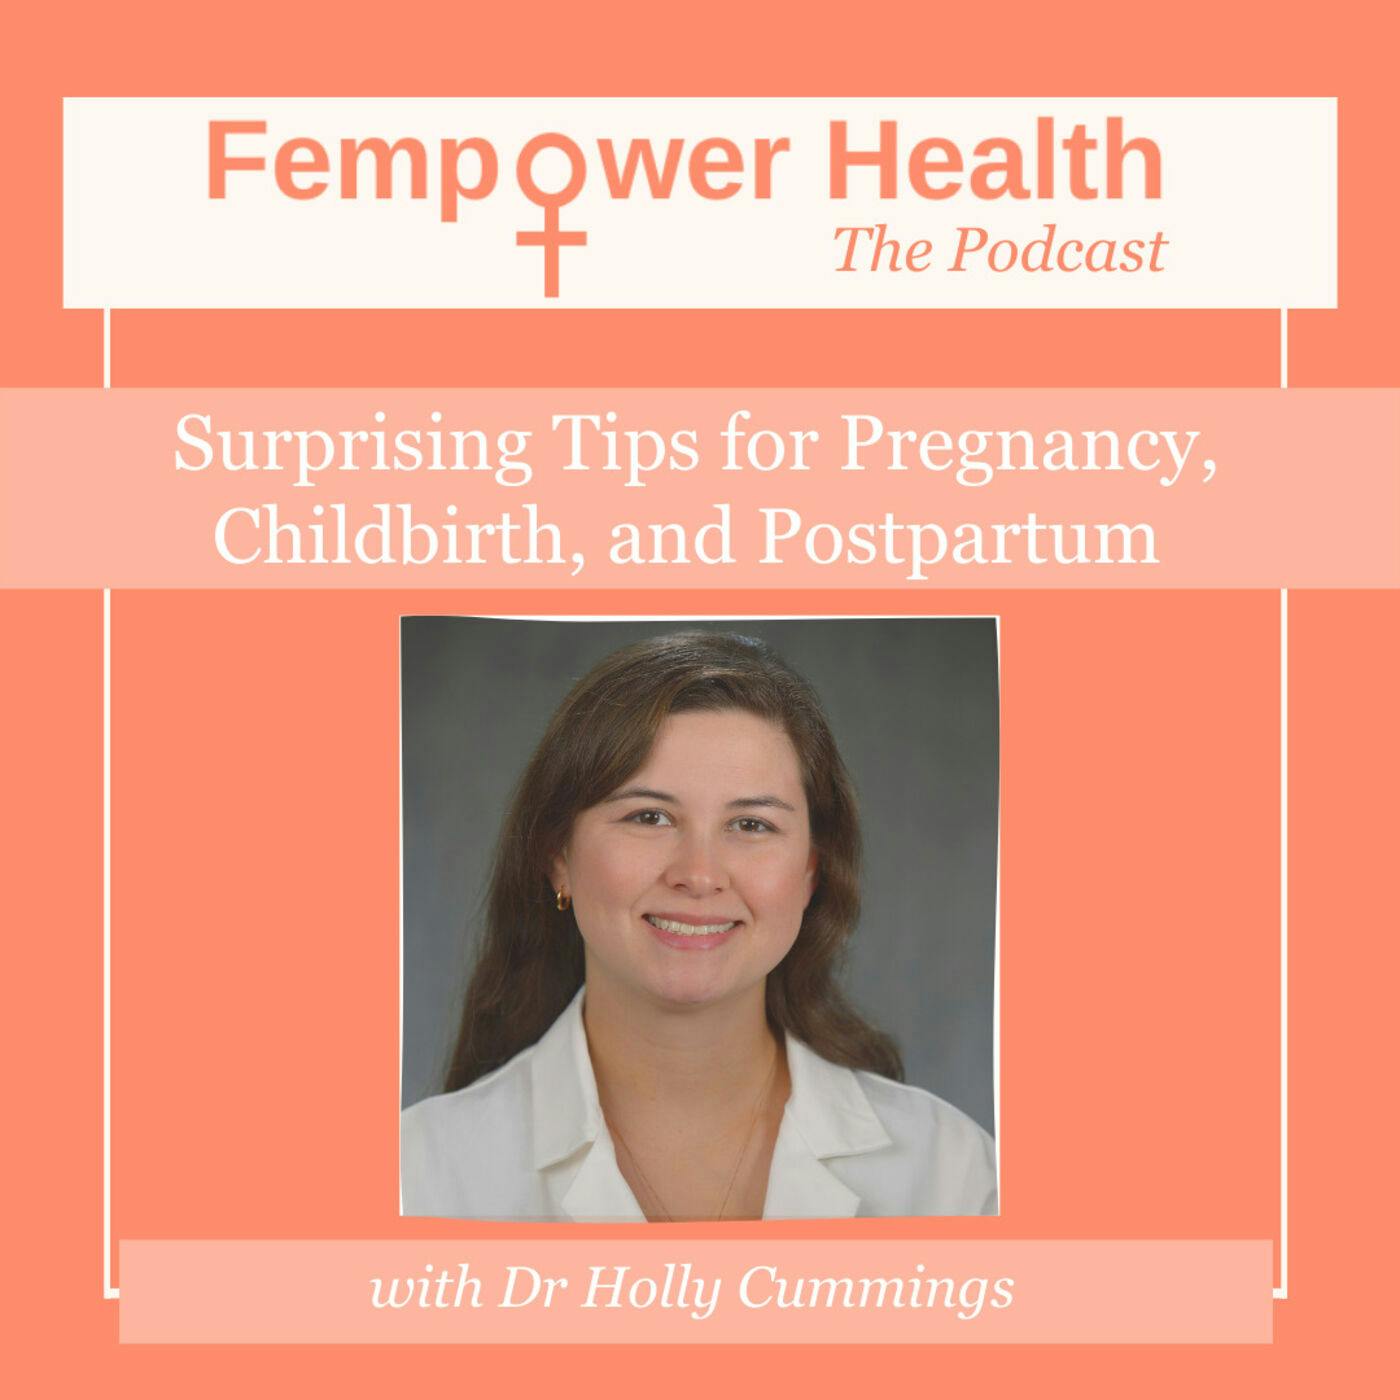 Surprising Tips for Pregnancy, Childbirth, and Postpartum | Dr. Holly Cummings